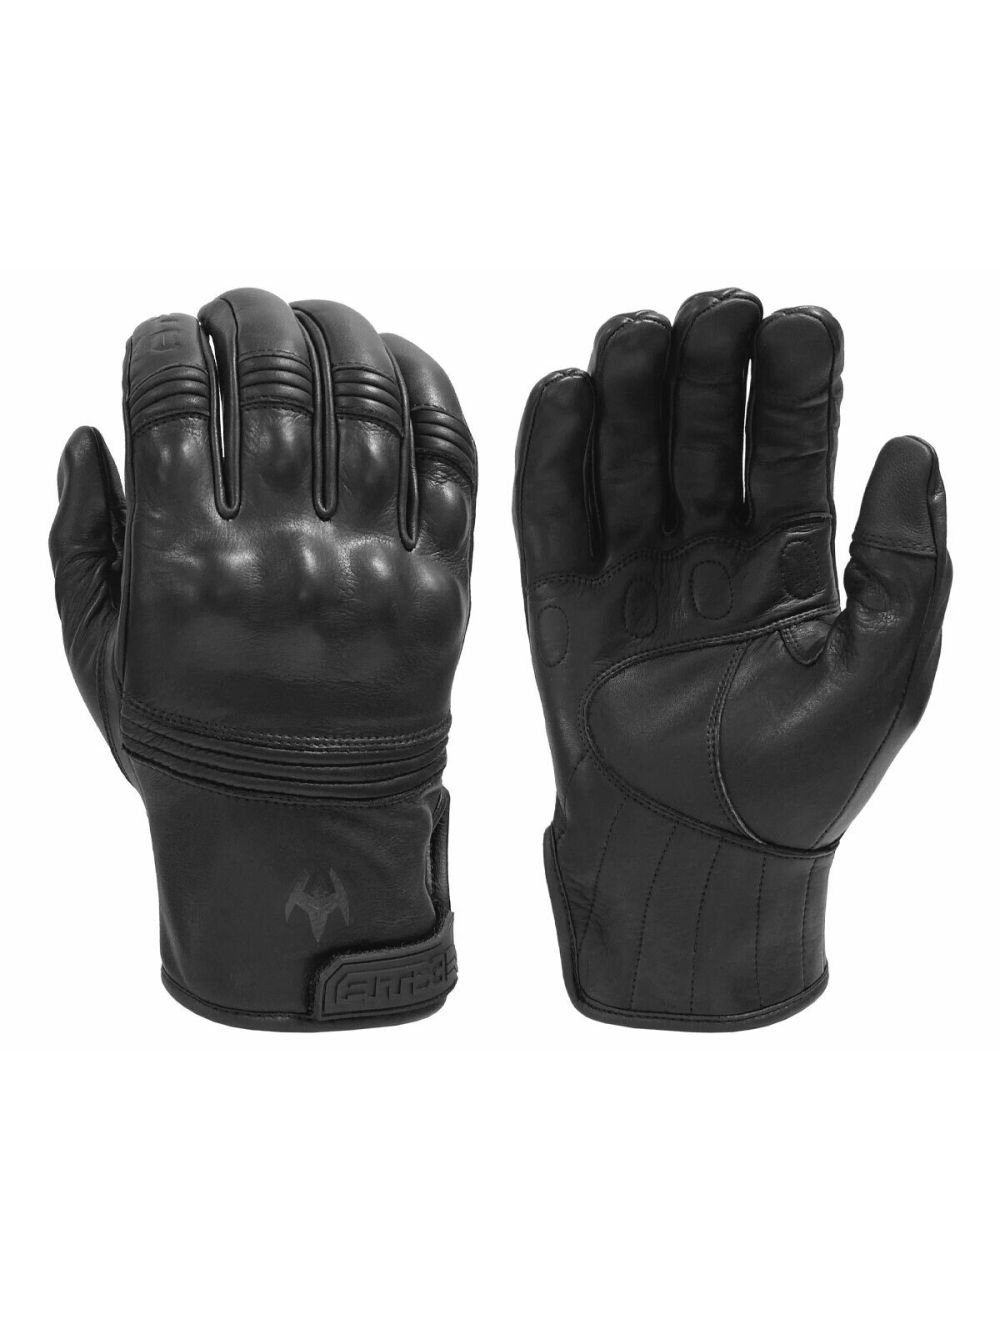 All-Leather Gloves with Knuckle Armor